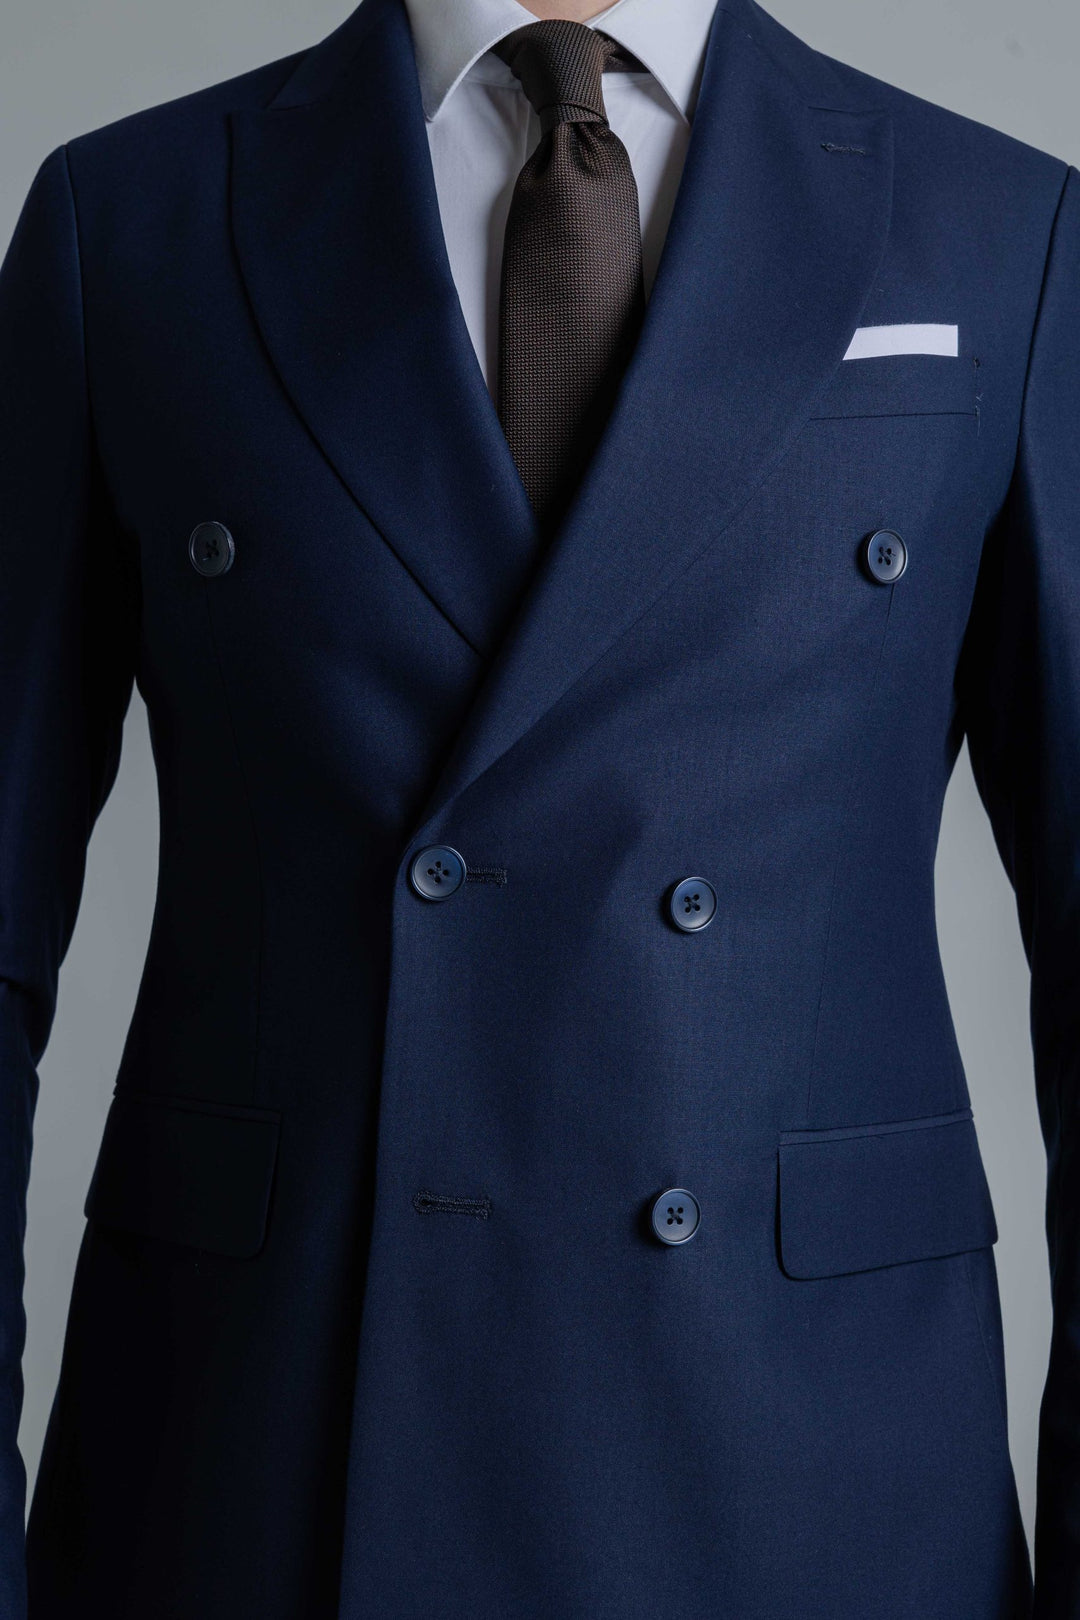 Two-piece blue suit with double-breasted jacket